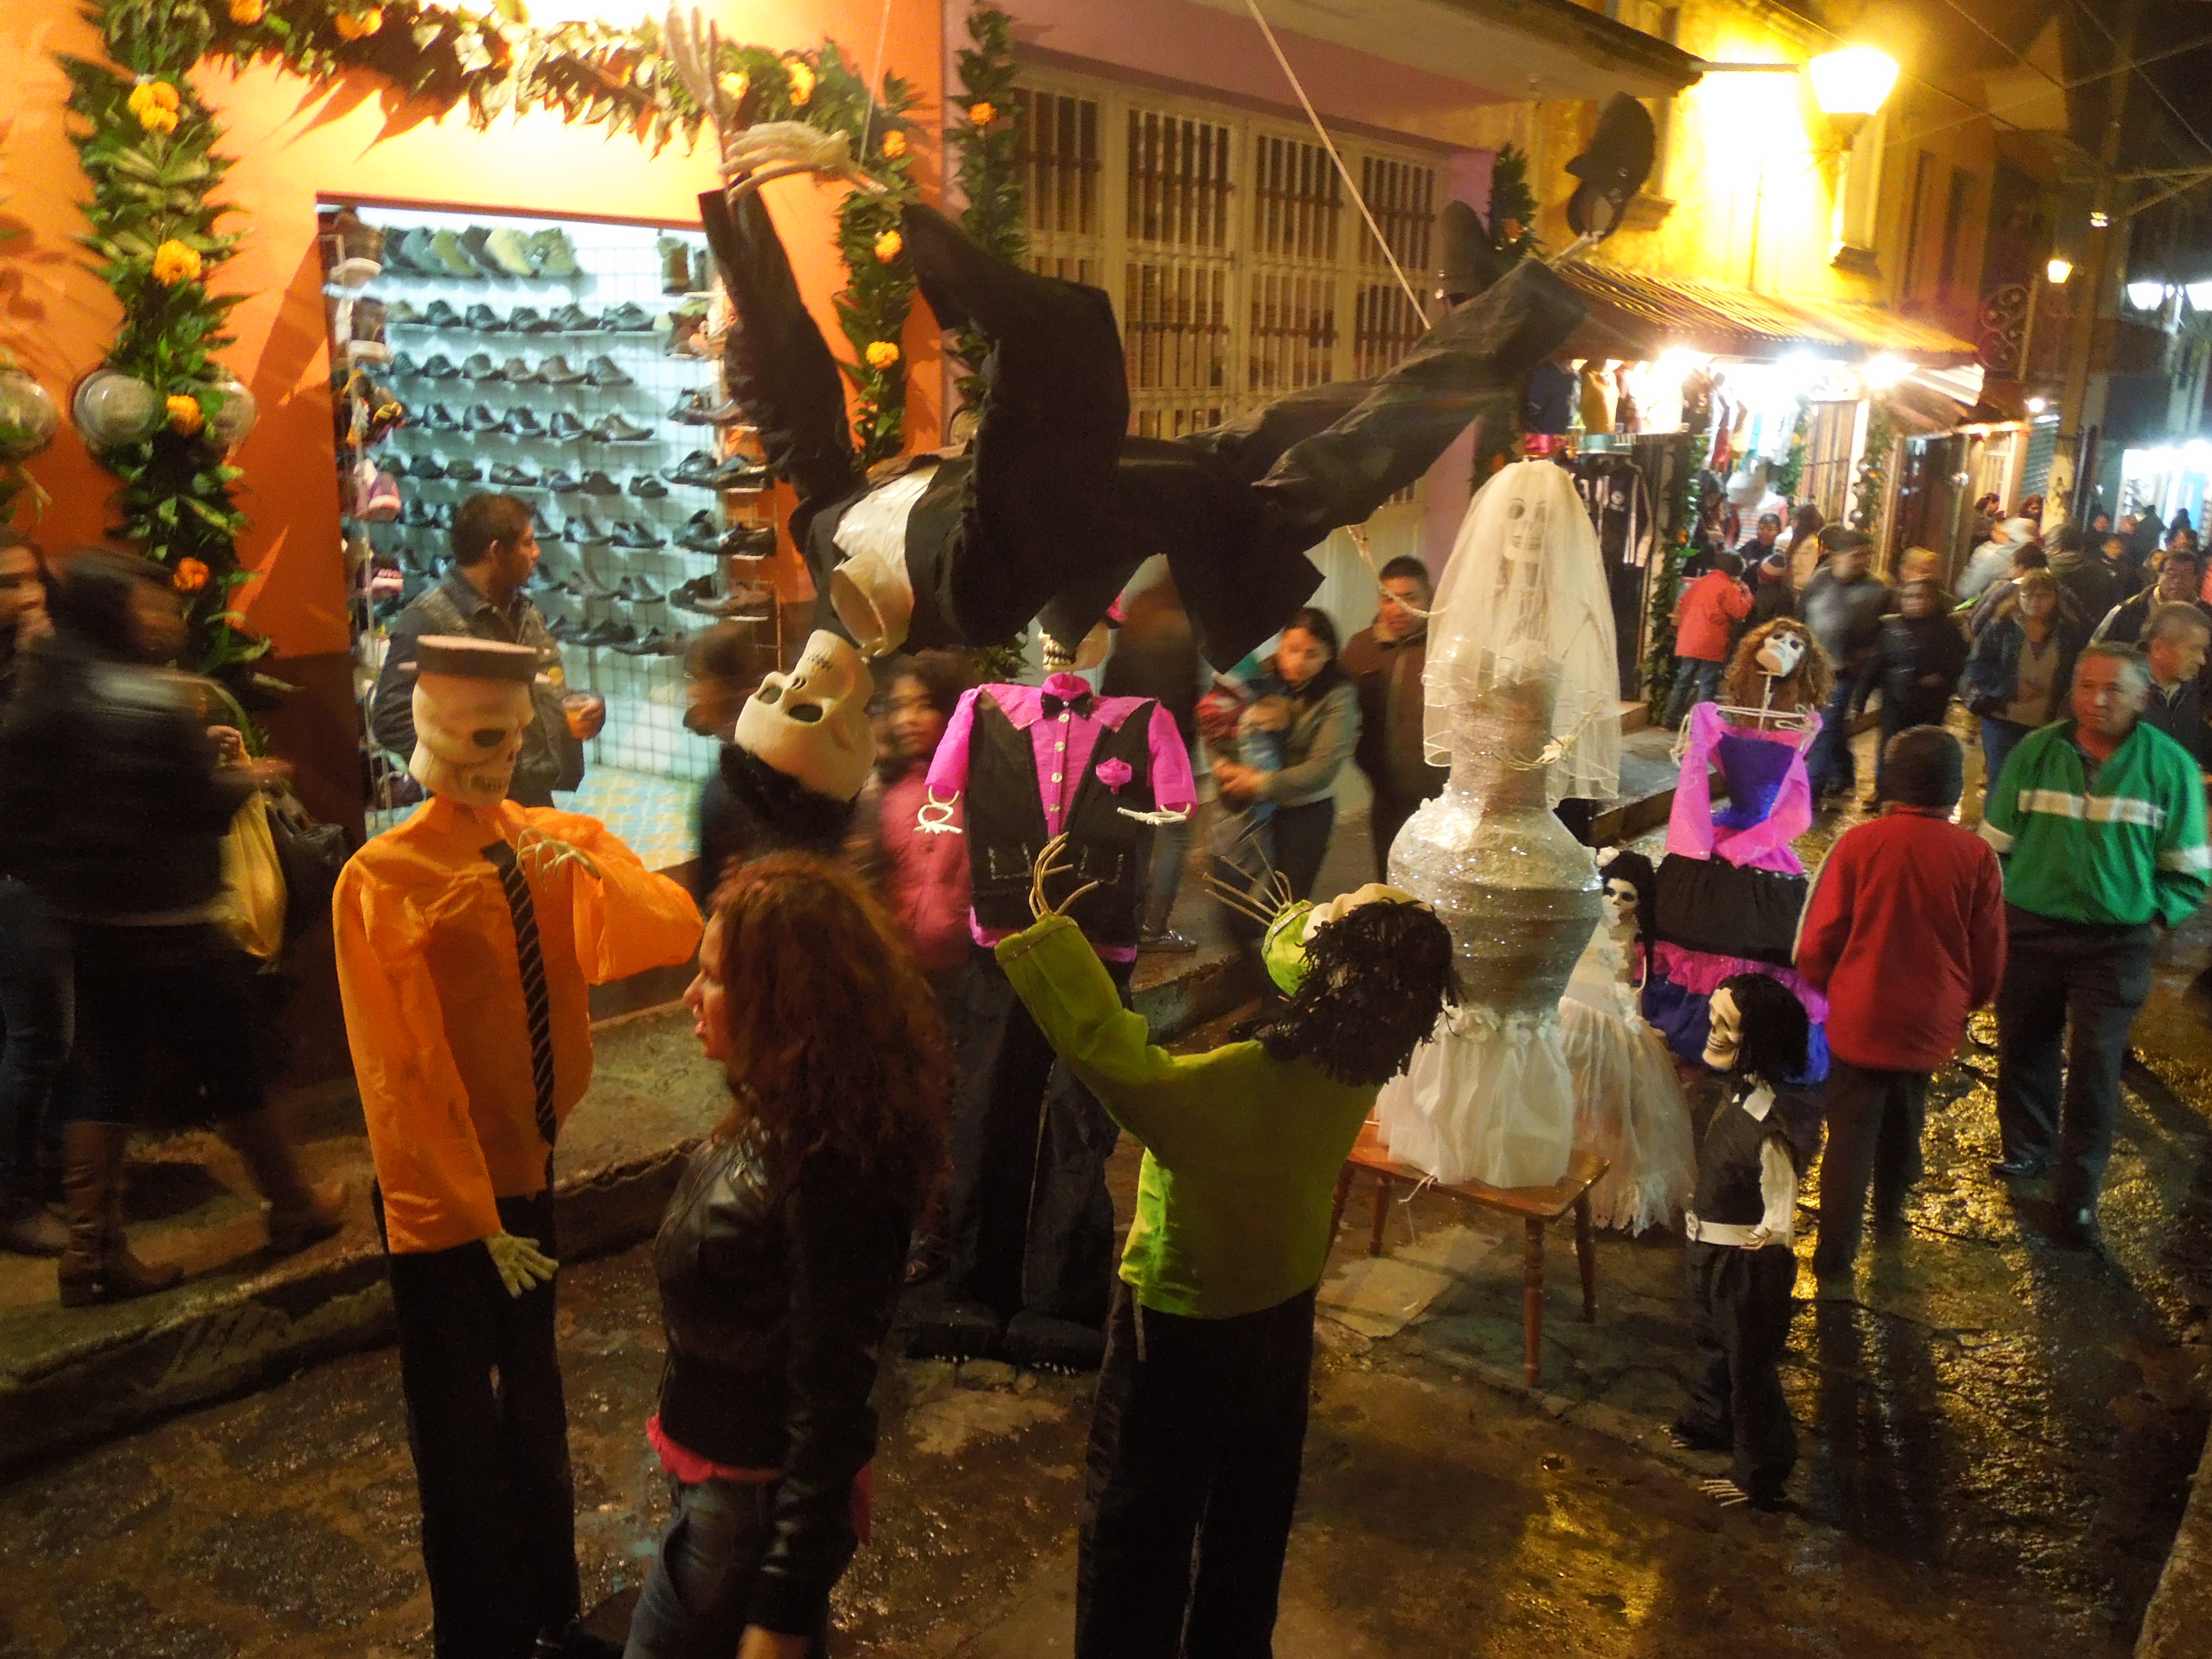 See lively skeletons on the streets of Naolinco, Veracruz for Día de Muertos (Day of the Dead) celebrations.